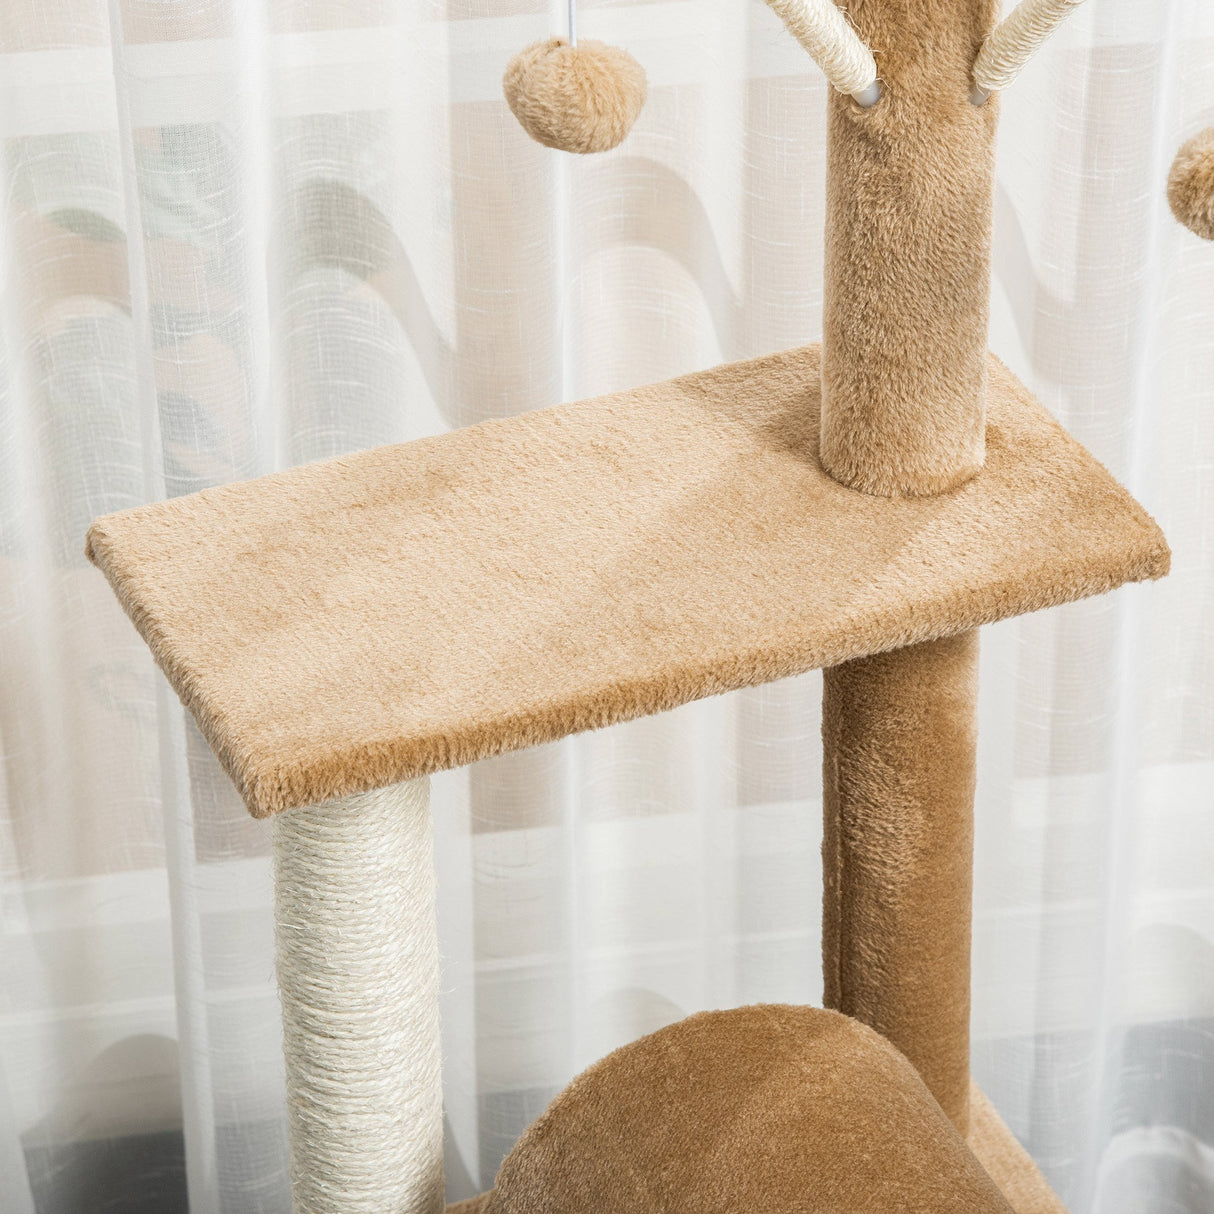 121cm Cat Tree Tower for Indoor Cats Kitten Activity Centre Scratching Post with Bed Tunnel Perch Interactive Ball Toy, PawHut, Light Brown